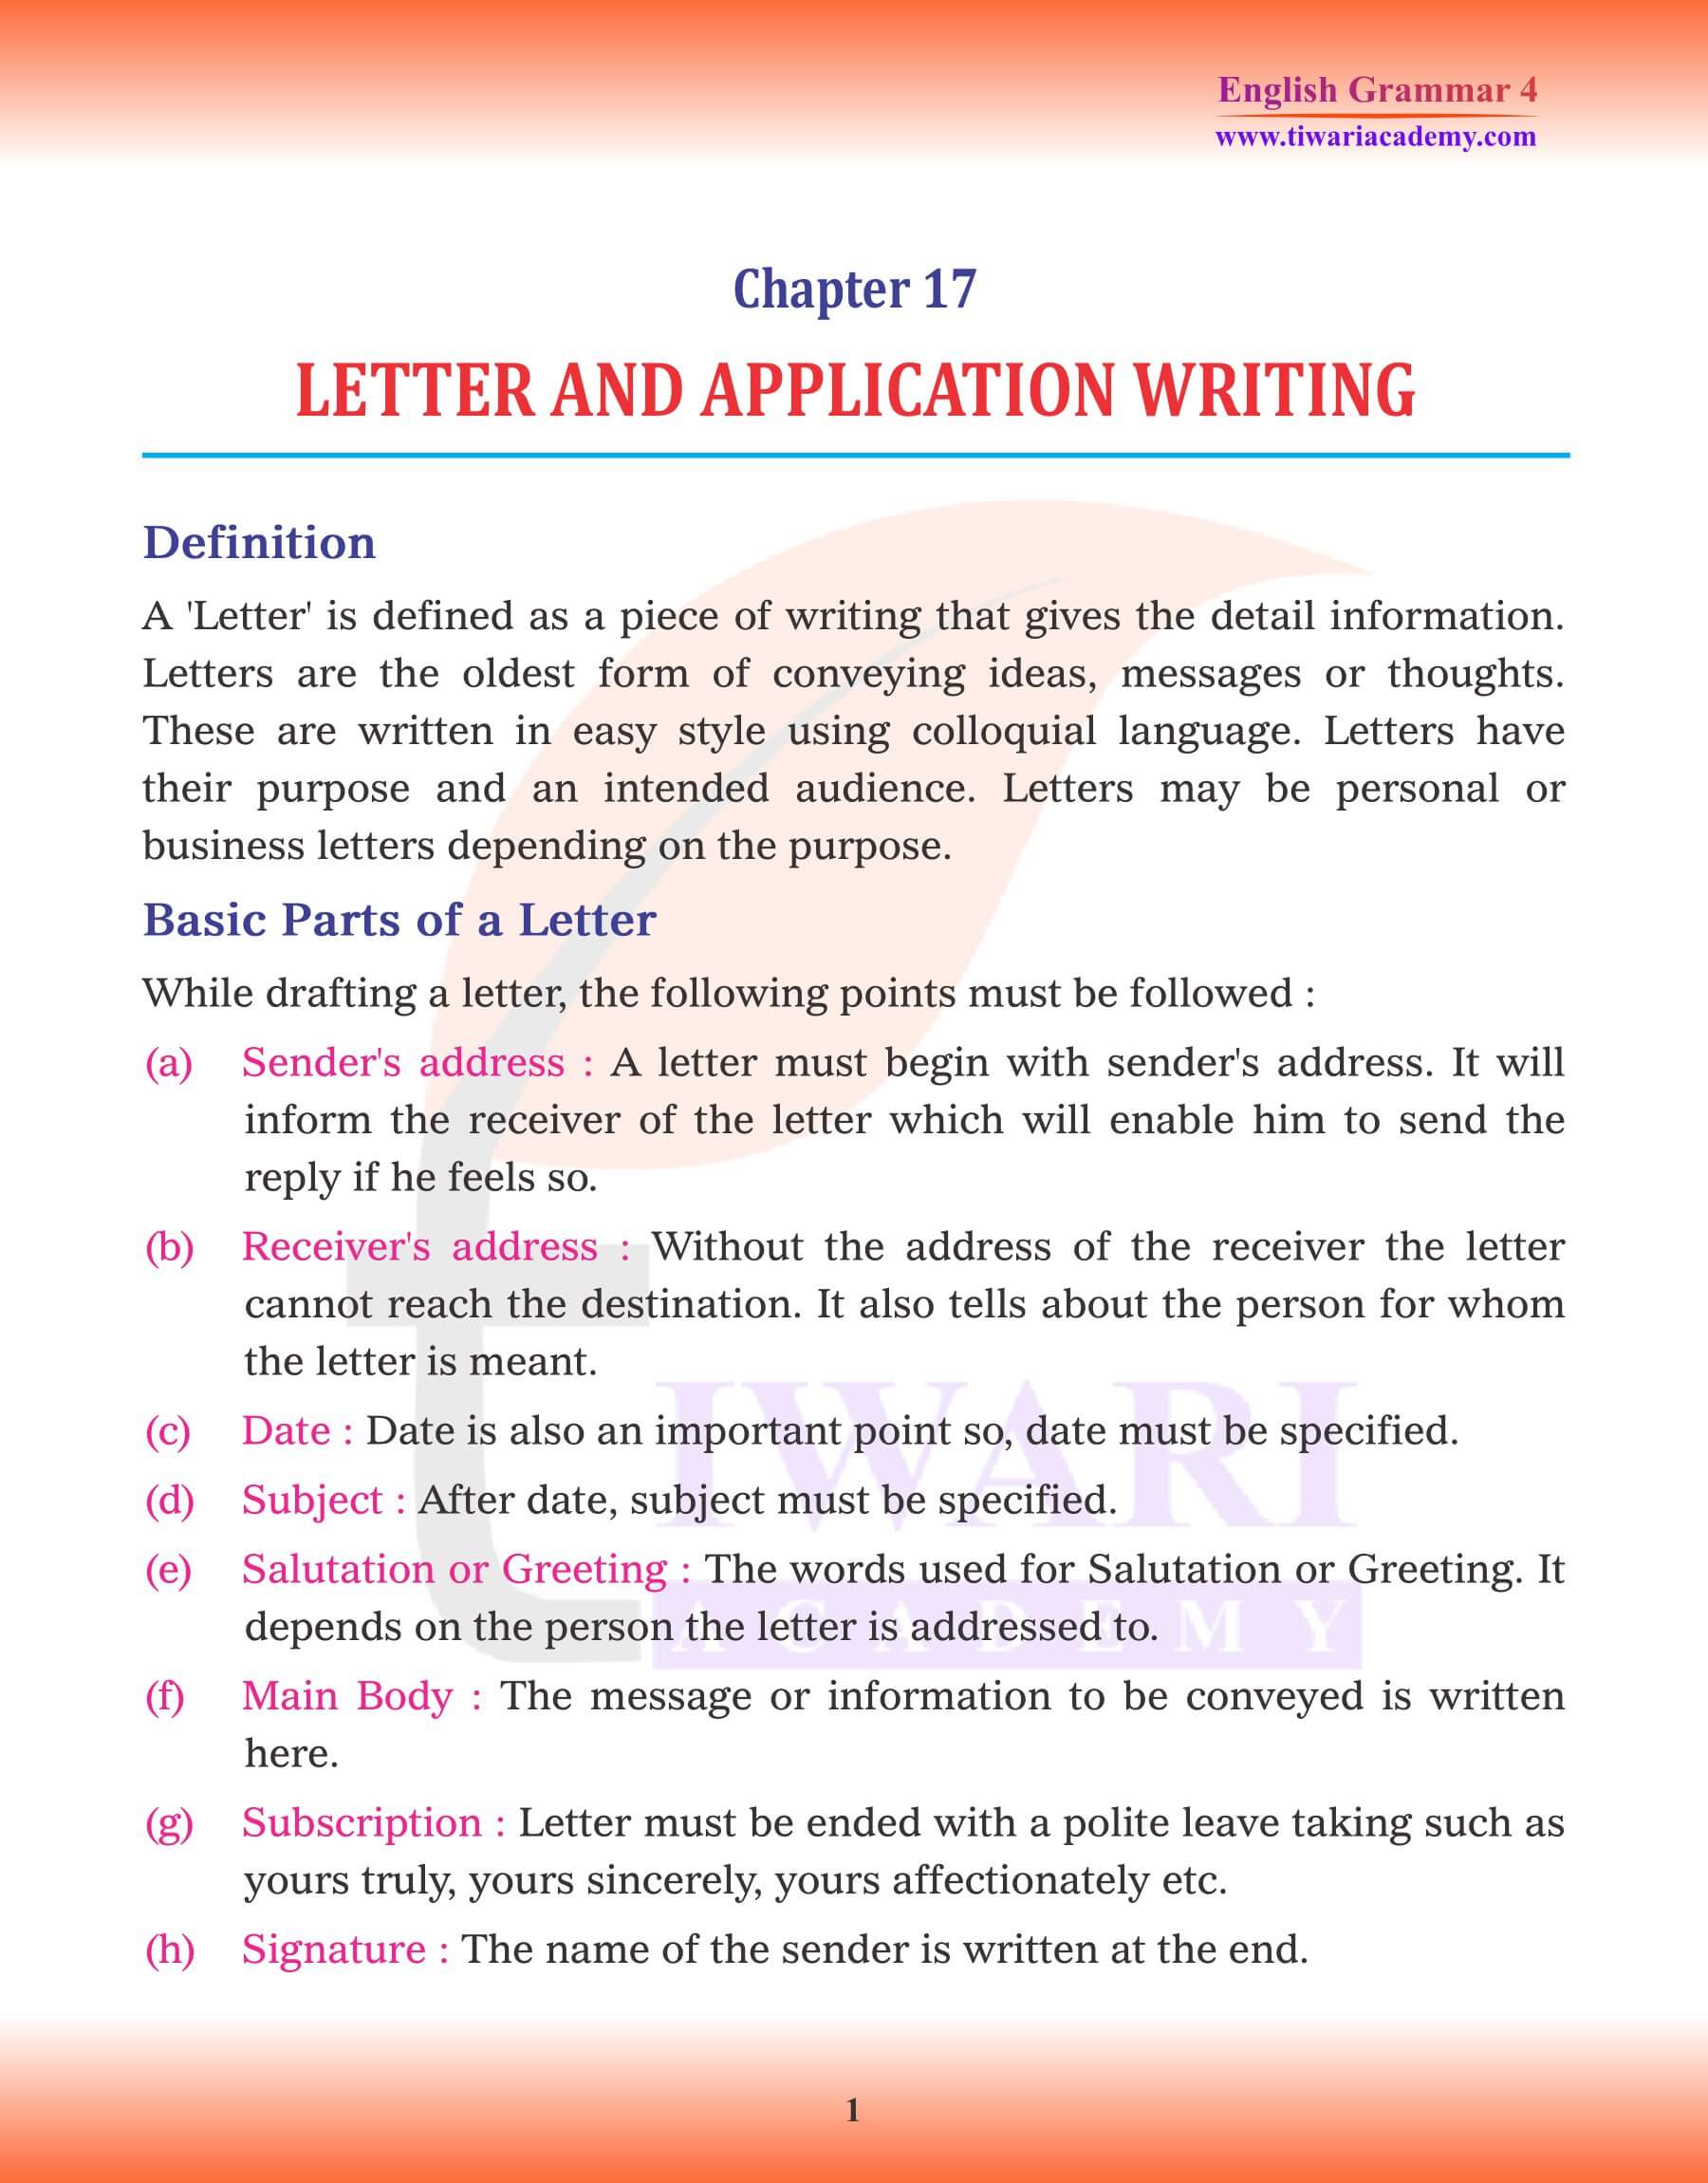 Class 4 English Grammar Letter and Application Writing